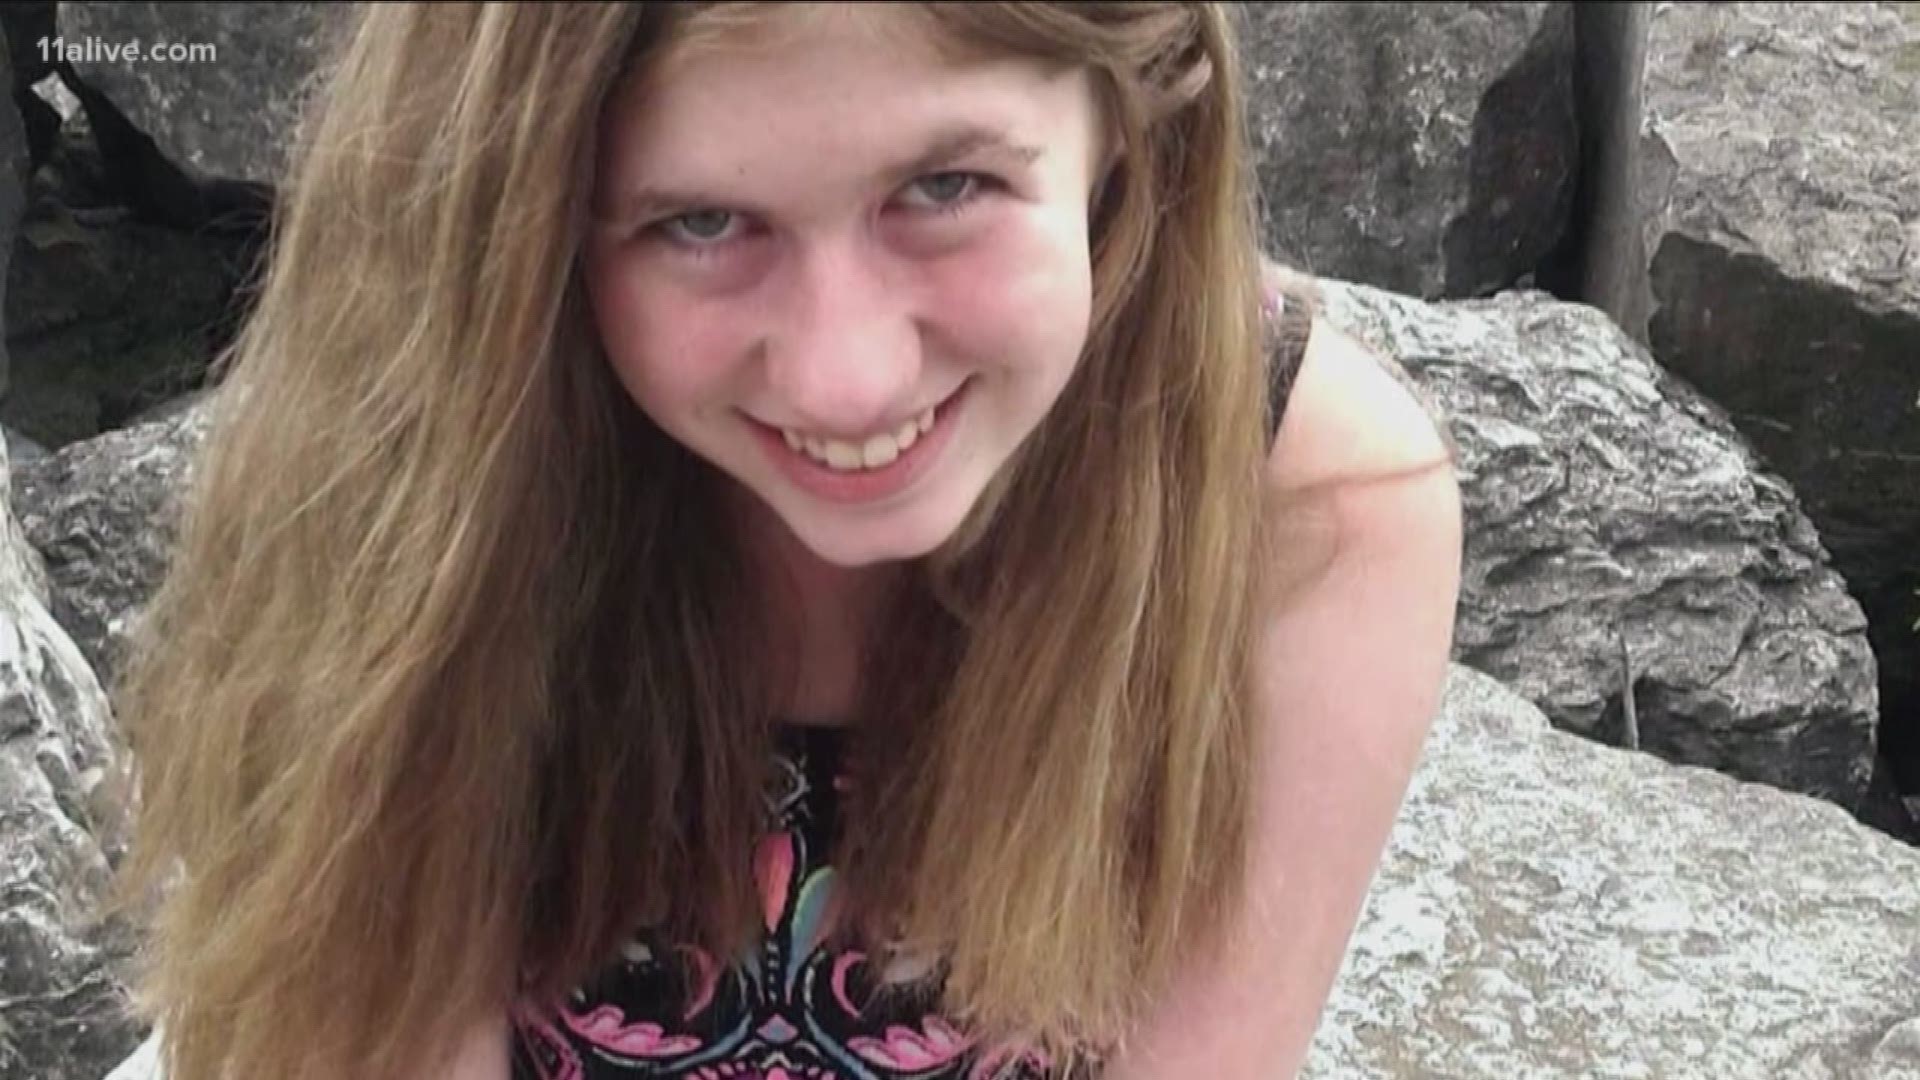 Jayme Closs managed to find neighbors nearby while the kidnapper also accused of killing her parents was away.